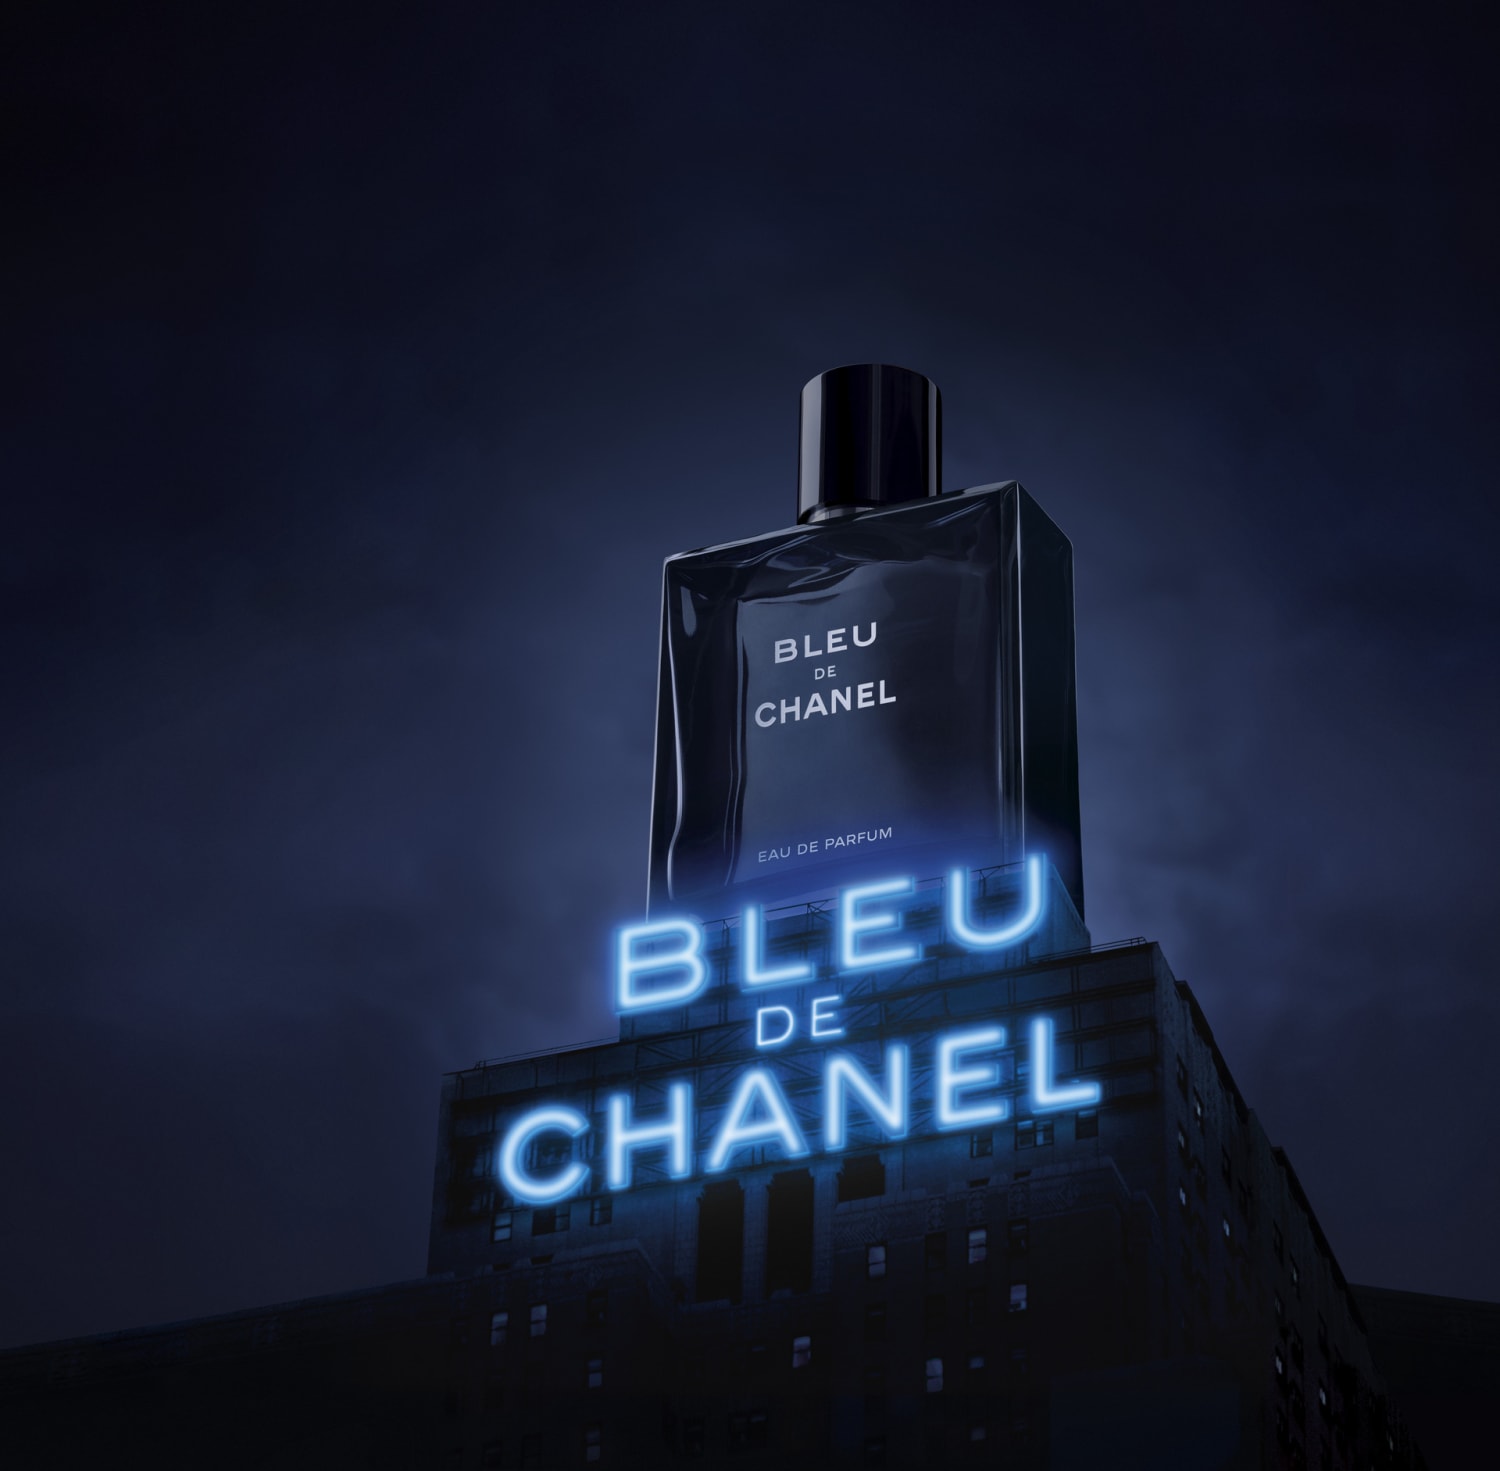 Chanel Launched a New Chanel Bleu Fragrance and Campaign